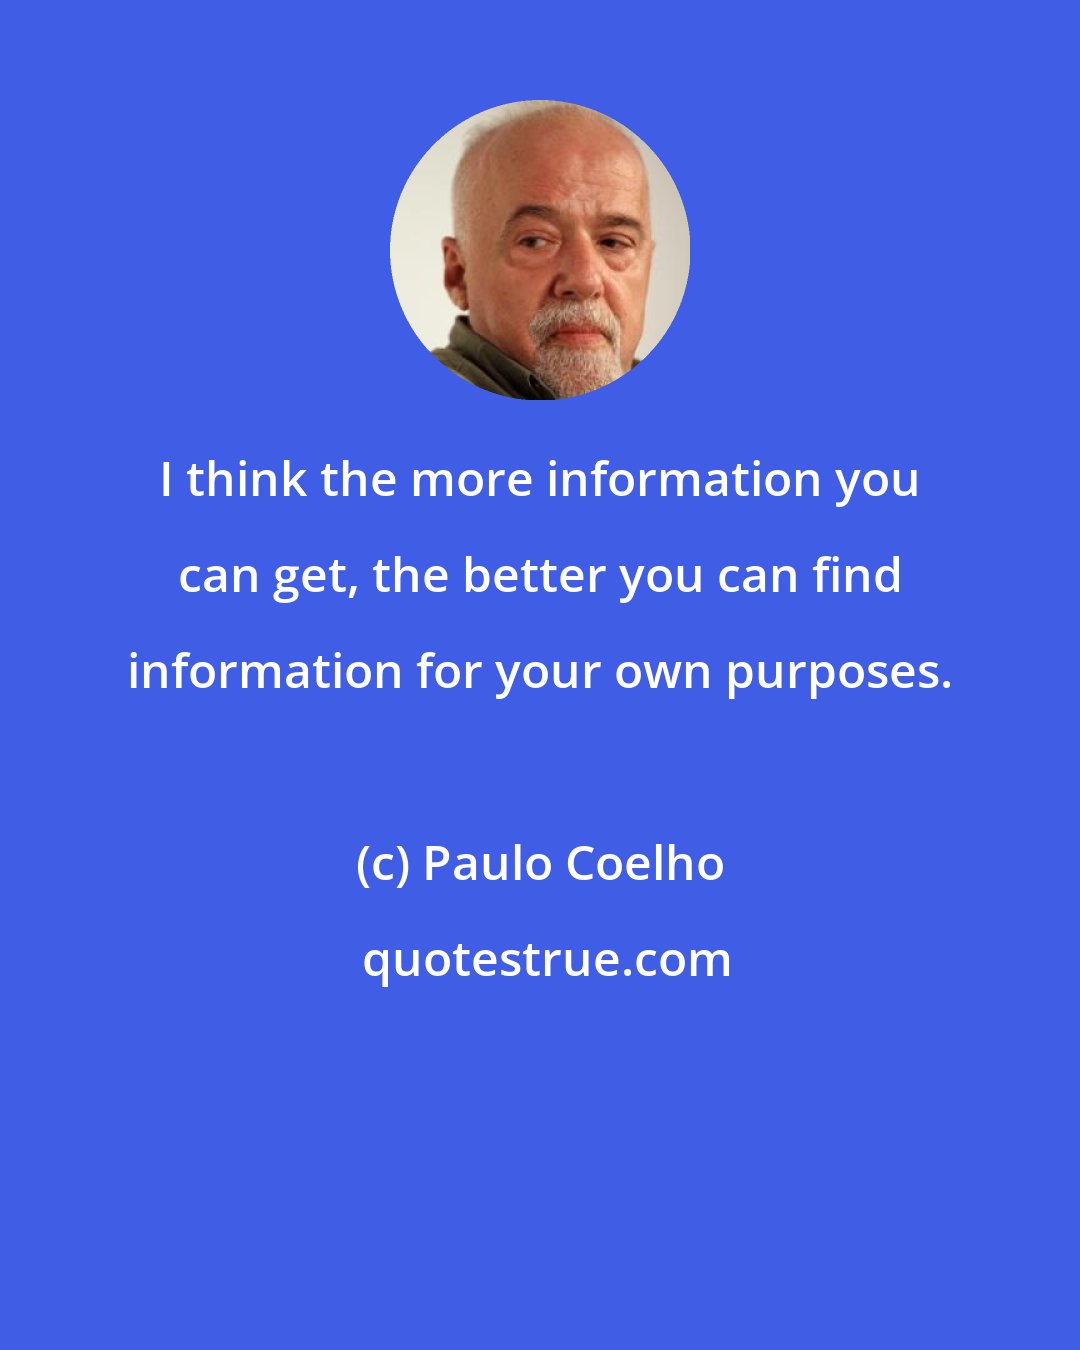 Paulo Coelho: I think the more information you can get, the better you can find information for your own purposes.